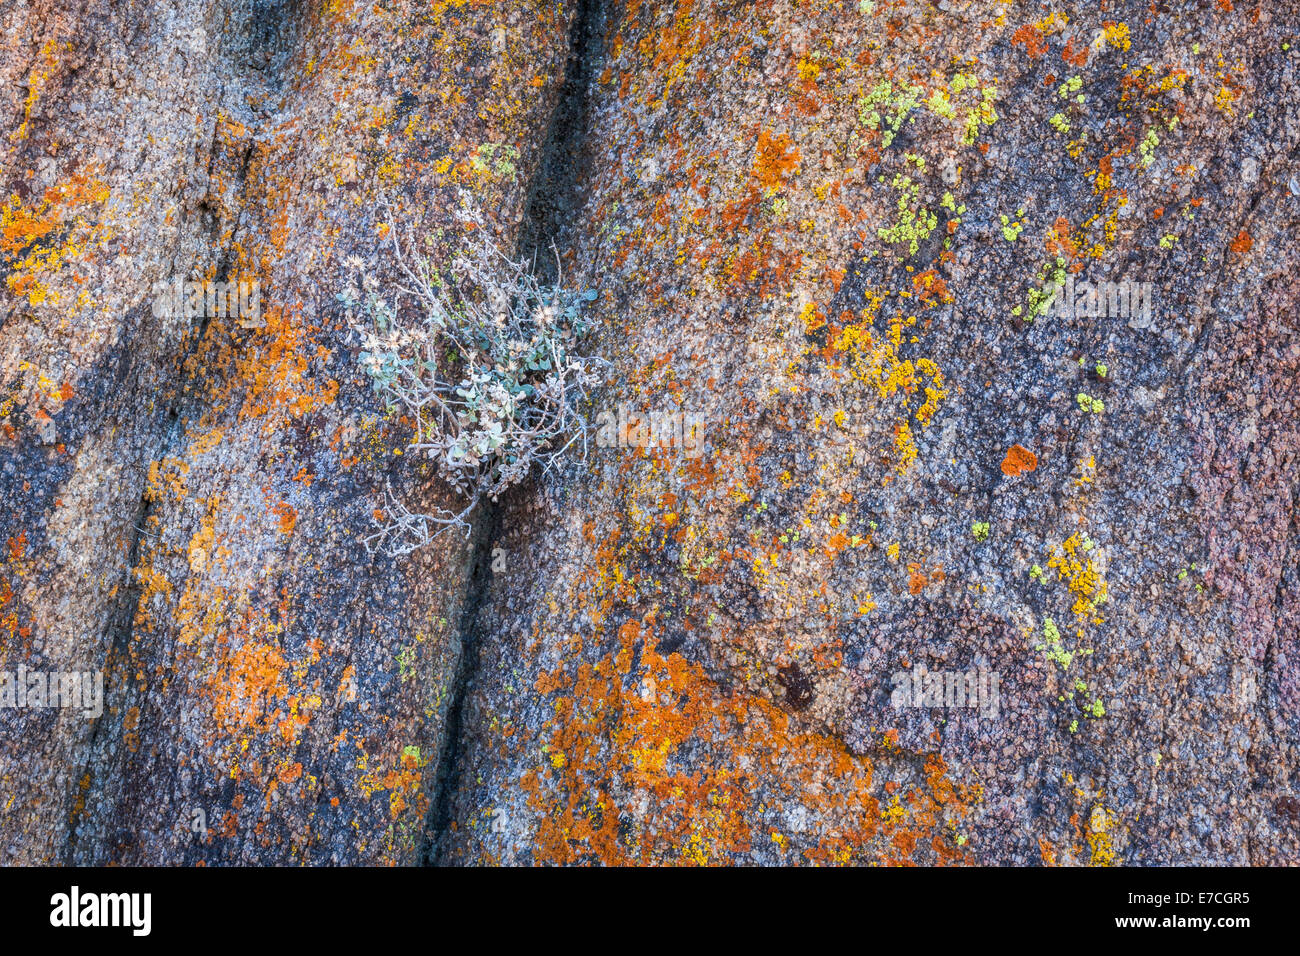 Close up of local flora living in granite rock crevice with orange and yellow lichens, Alabama Hills, California, USA Stock Photo